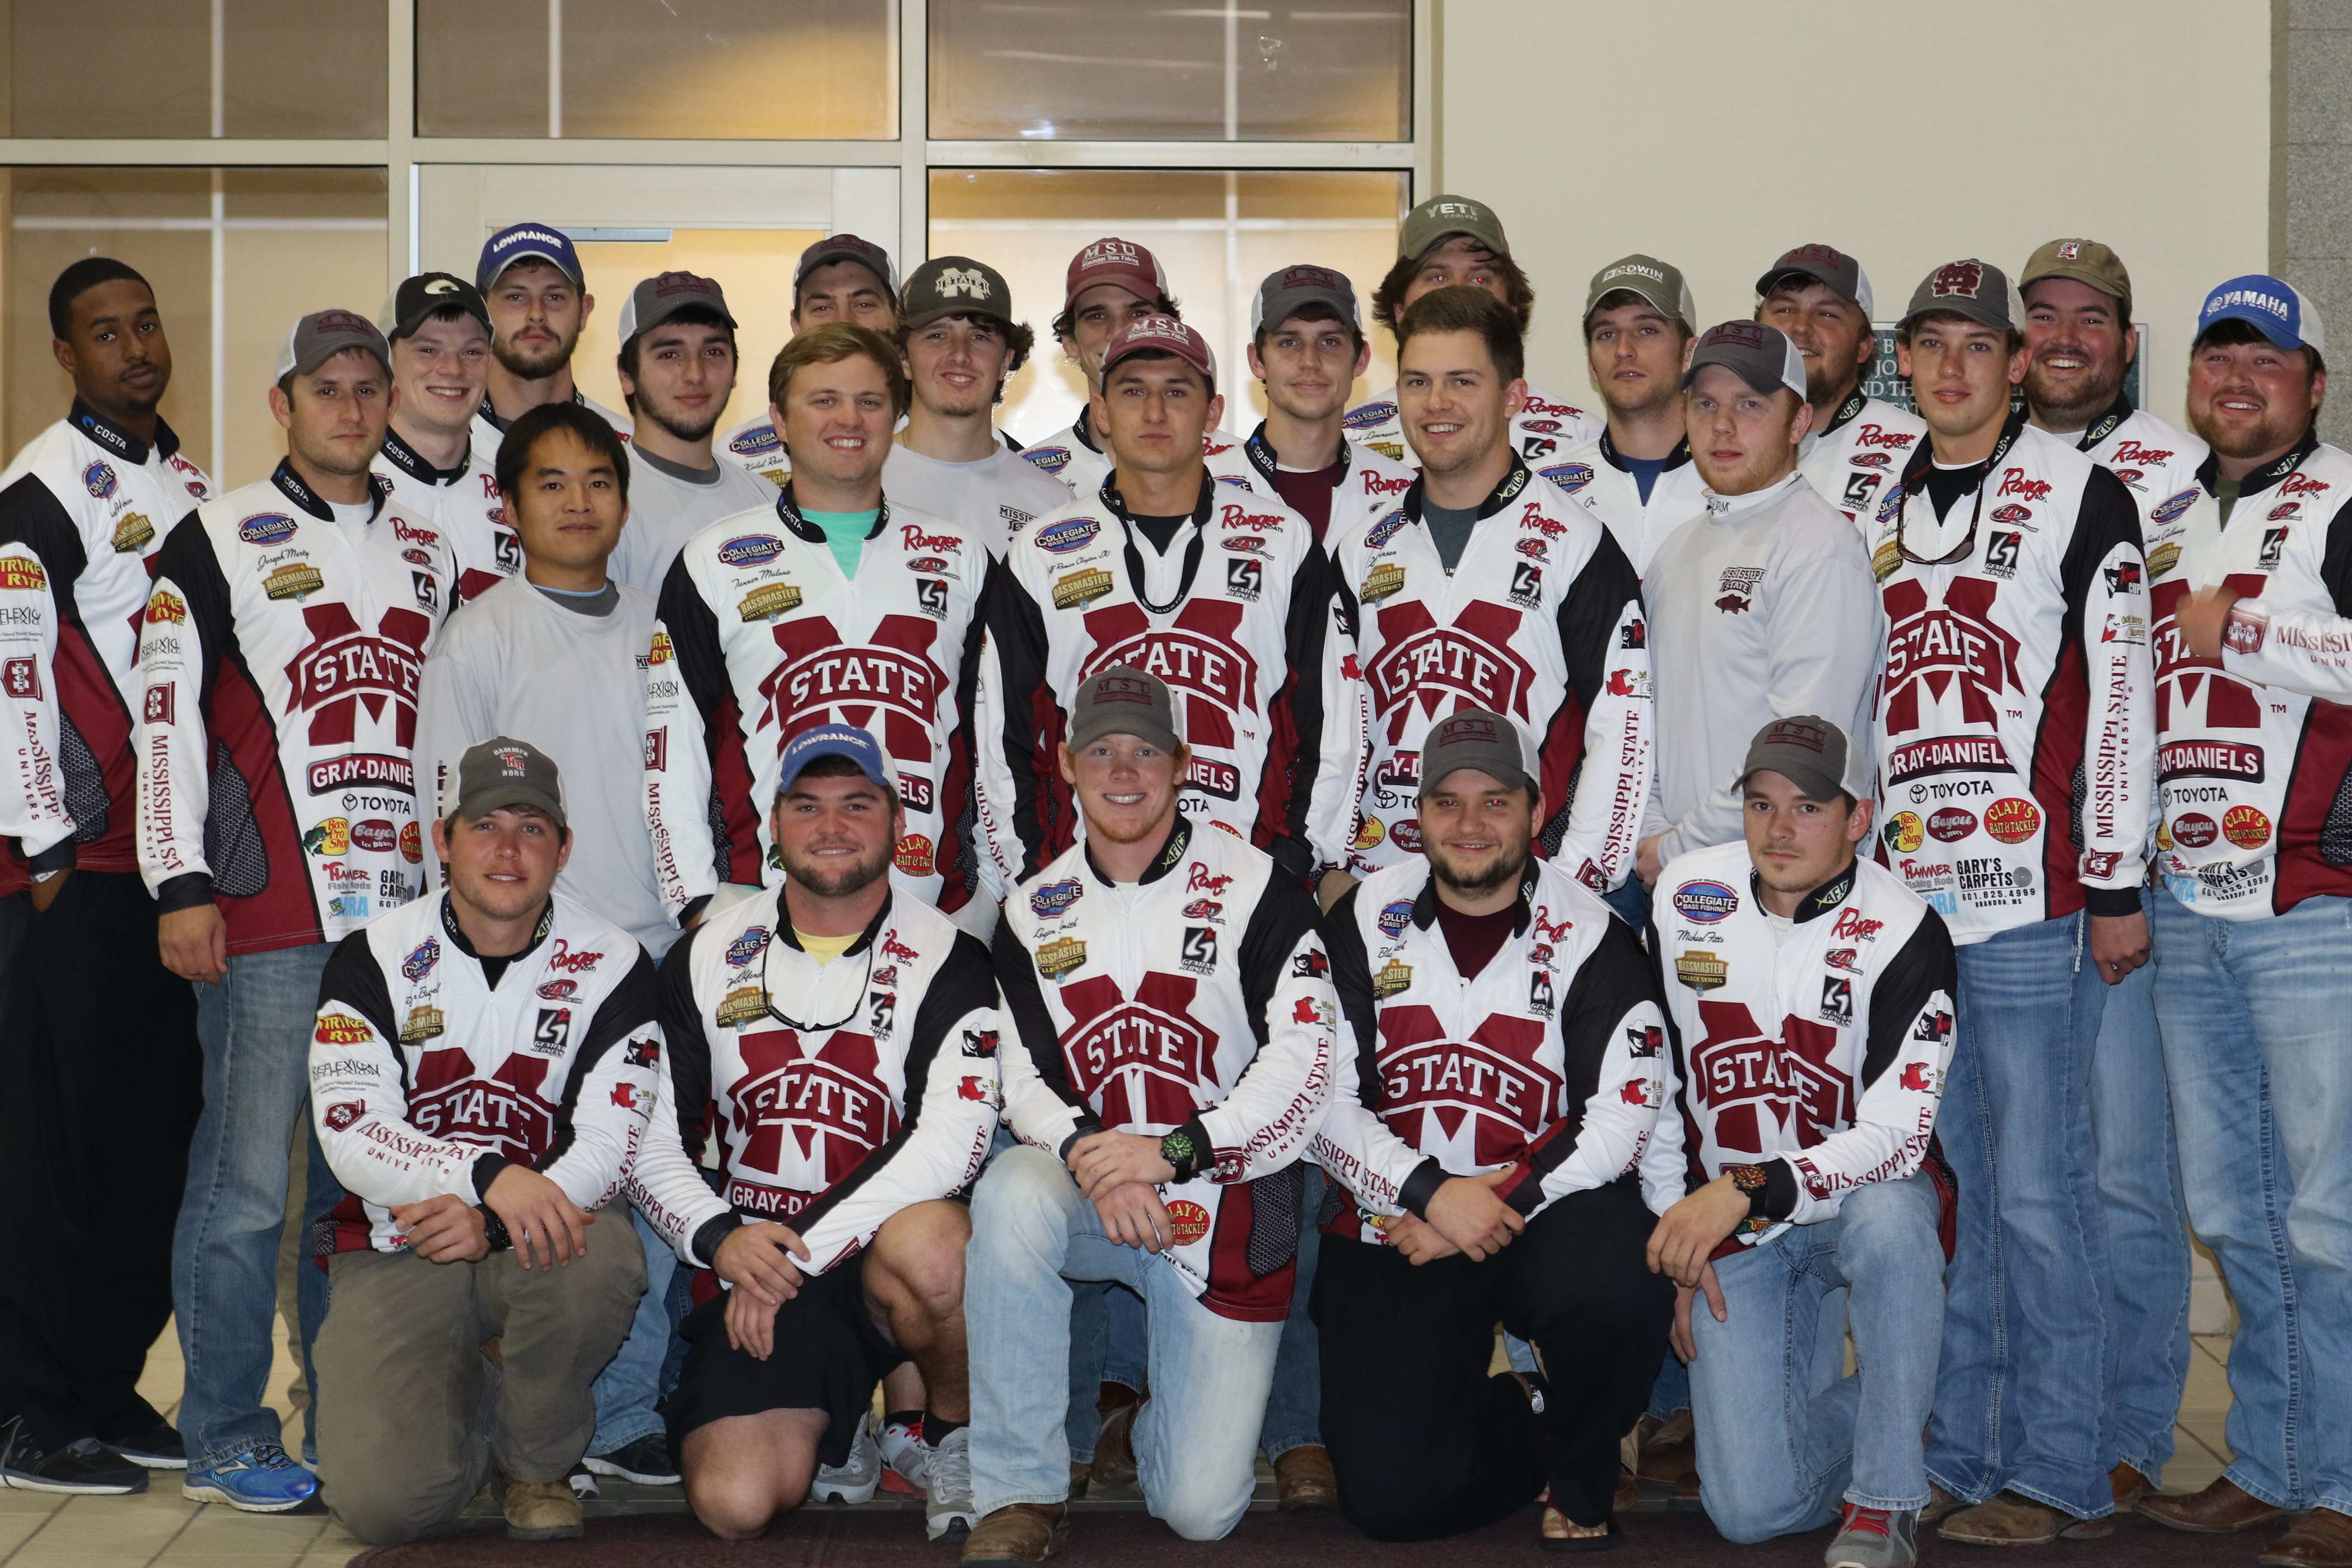 Members of MSU's Bass Fishing Club travel to Florence, Alabama, next month to compete in the 10th annual BoatUS Collegiate Bass Fishing Championship at Pickwick Lake.